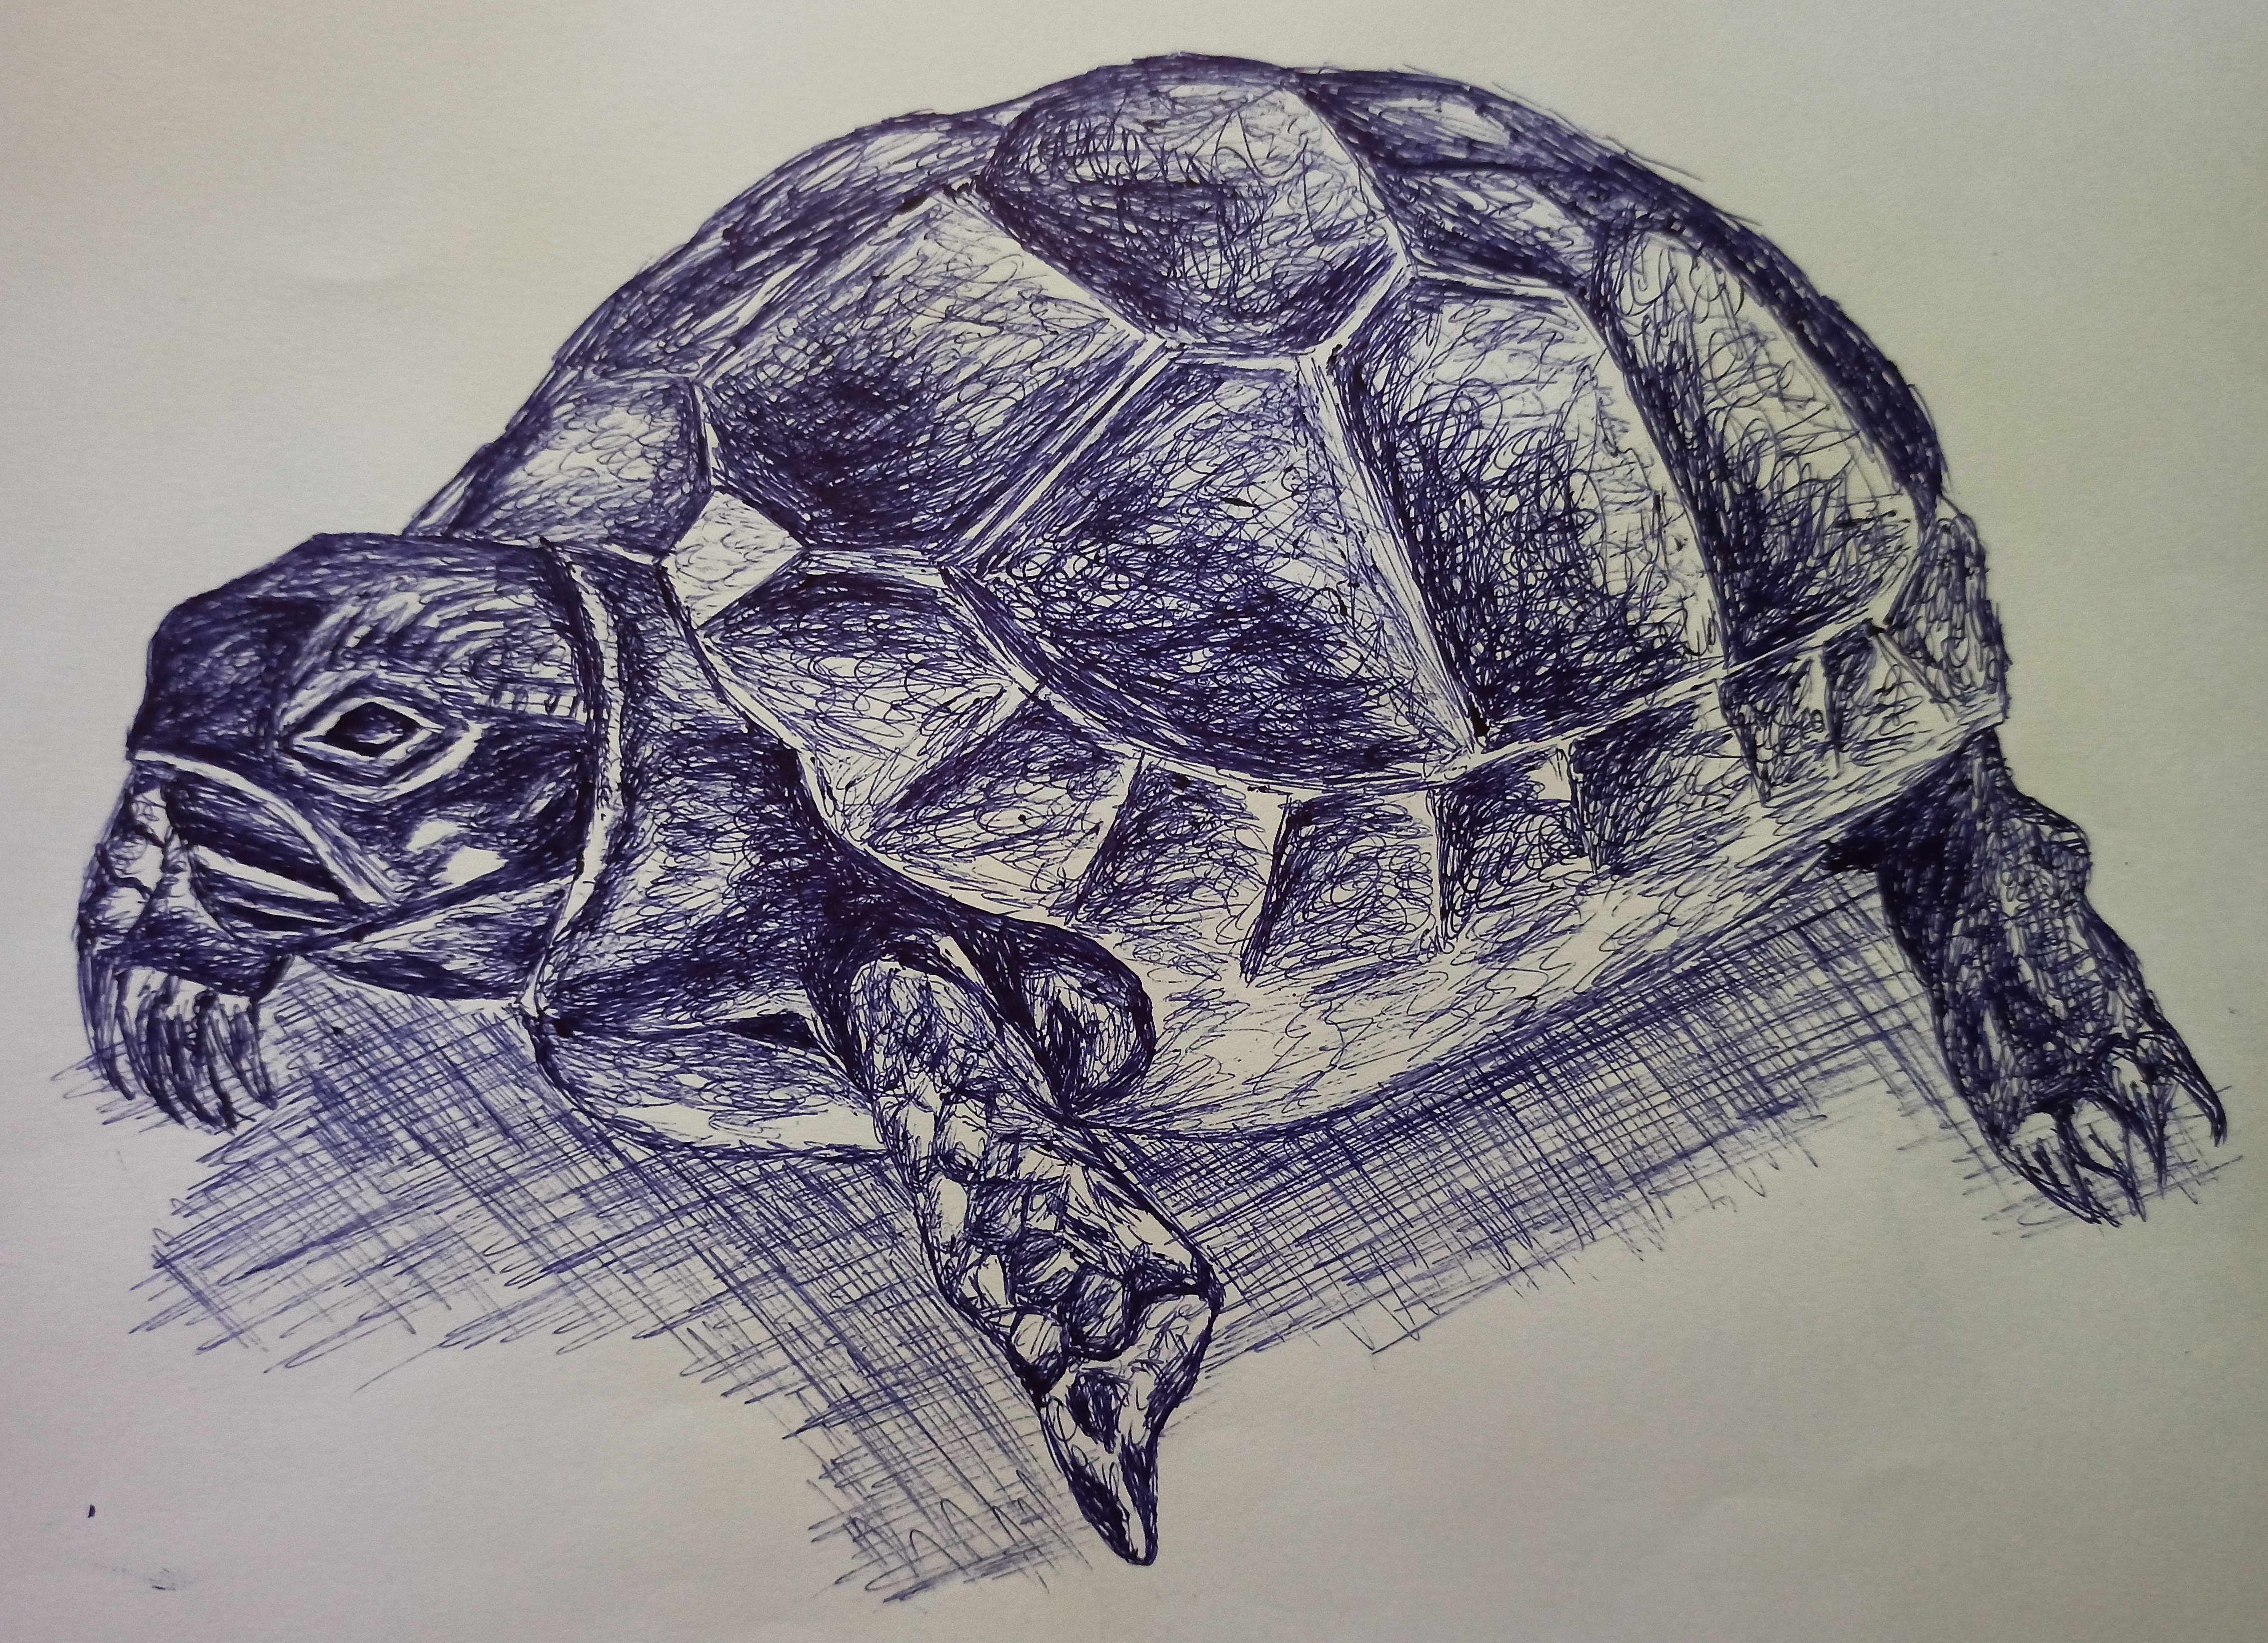 Daily Drawing Challenge: Day 3 - Reptile [Tortoise] | PeakD